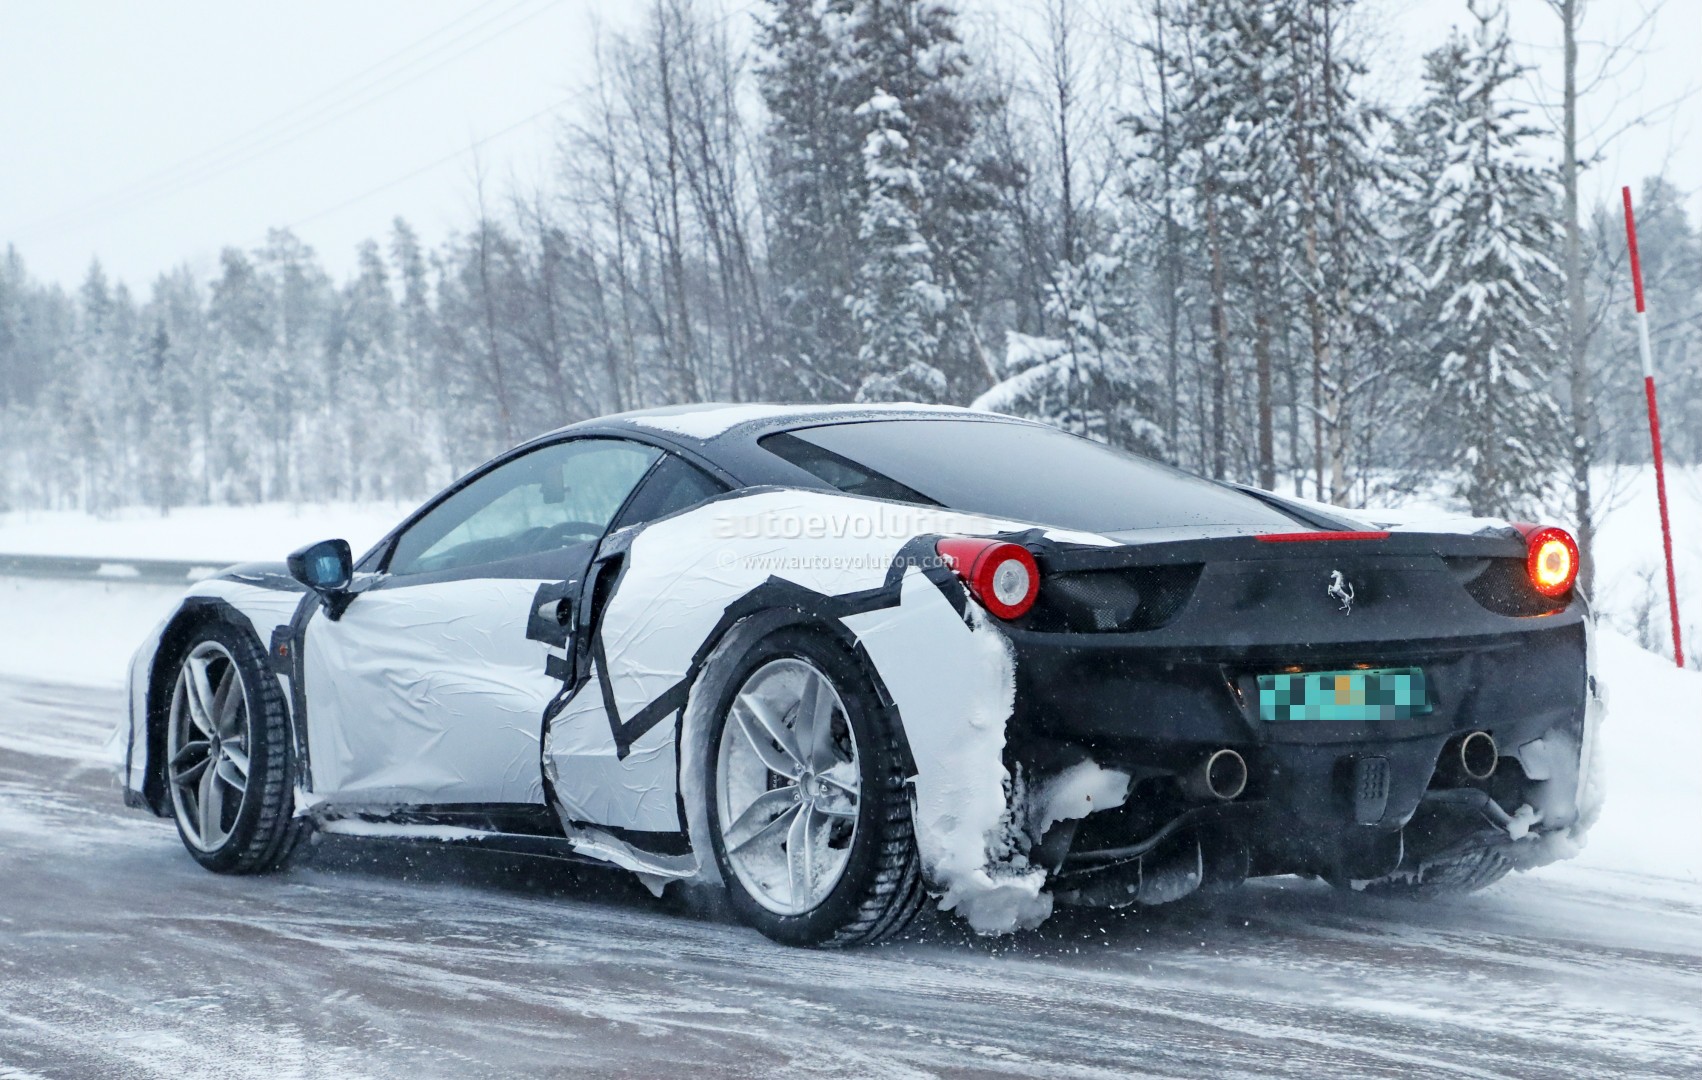 2019 - [Ferrari] Roma [F169] - Page 2 New-ferrari-dino-spied-testing-in-sweden-as-458-test-mule-with-v6-soundtrack_9